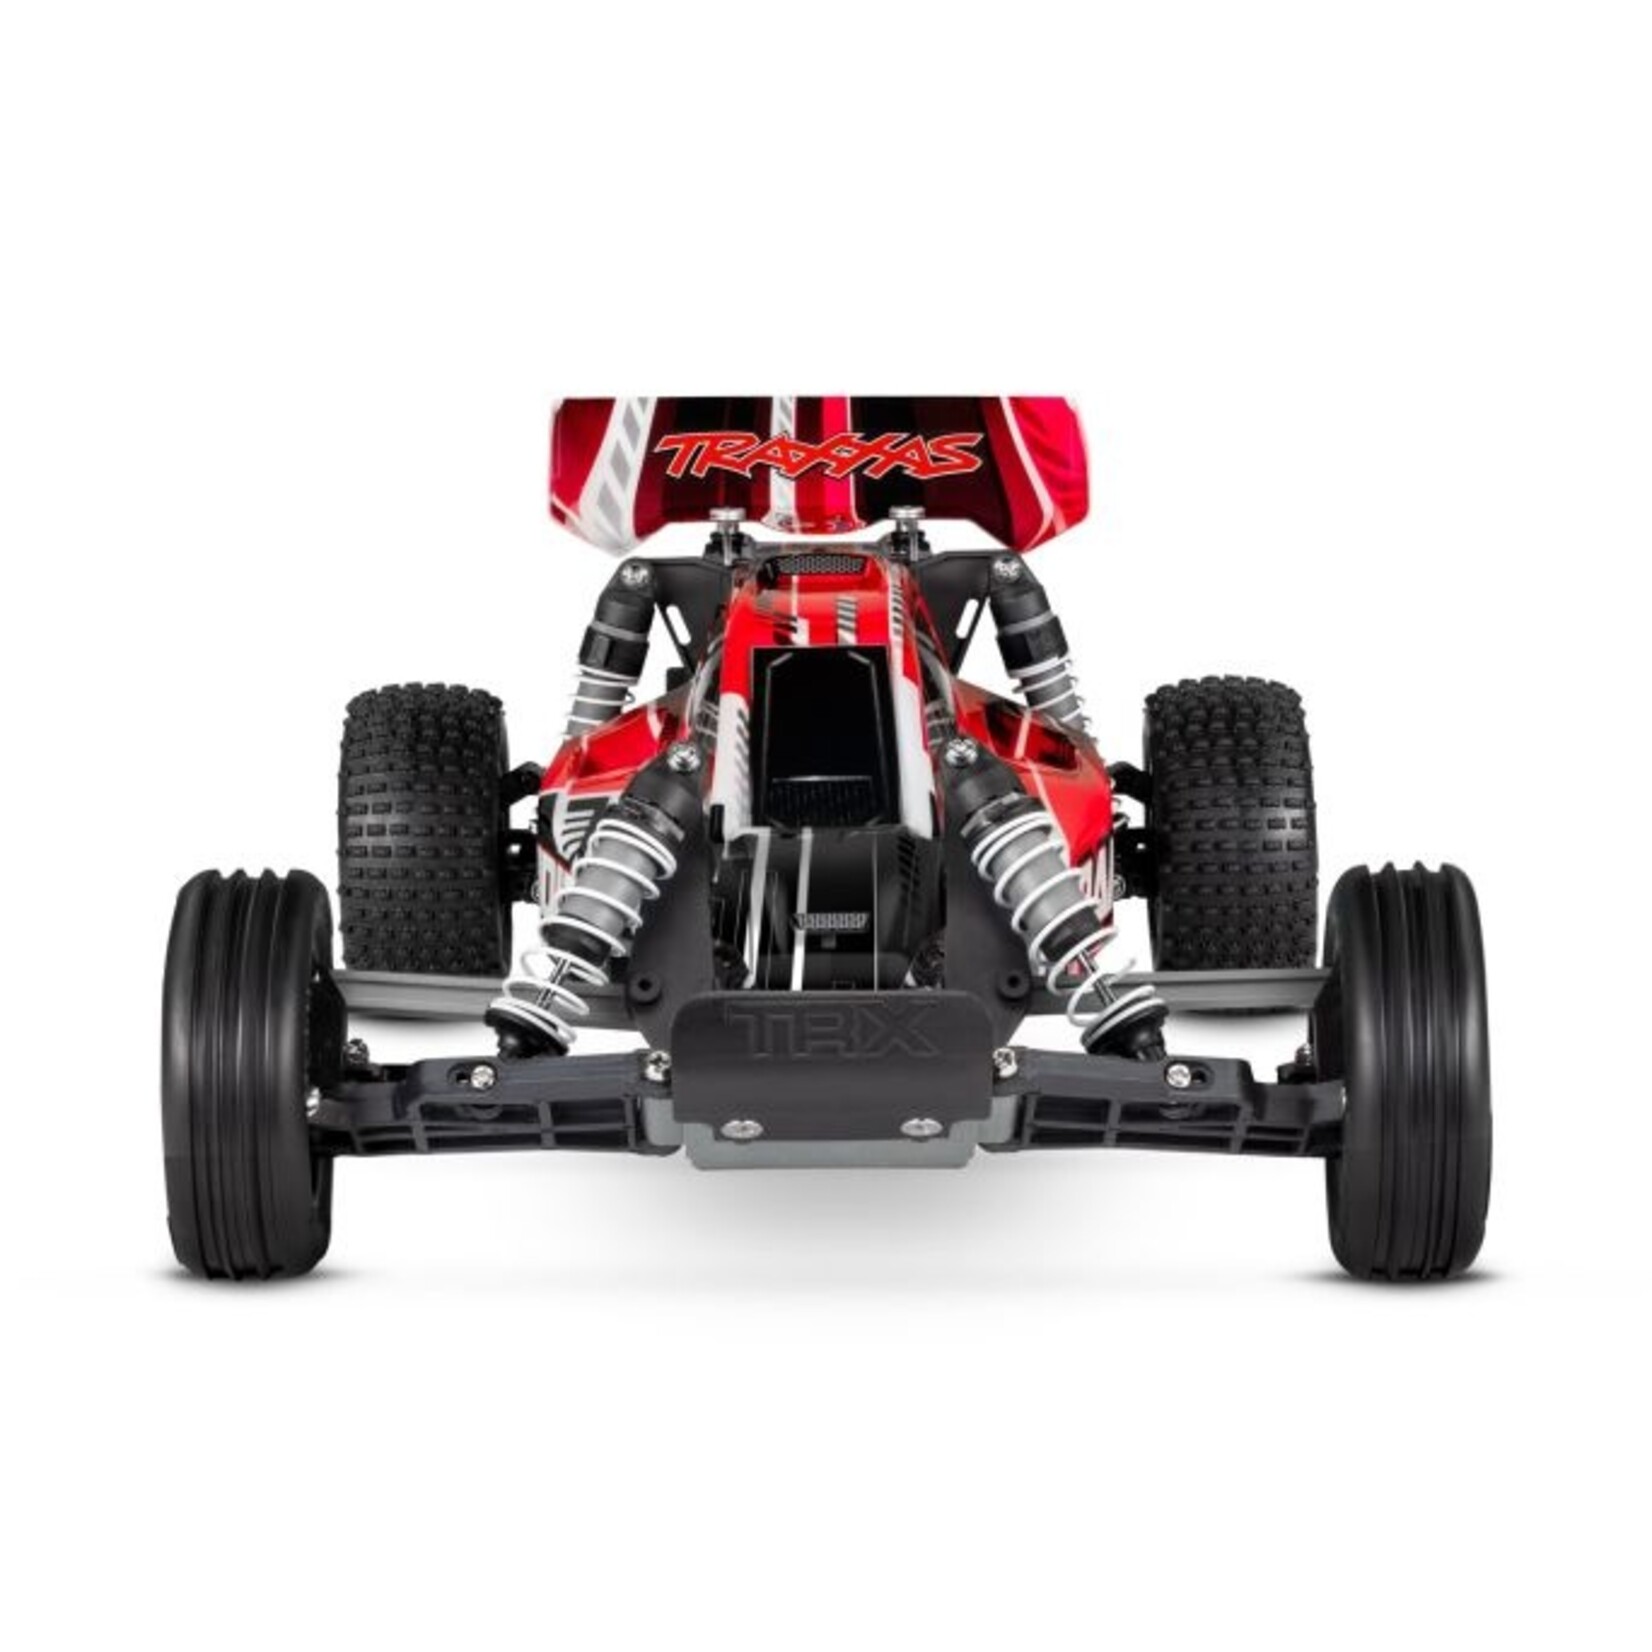 Traxxas Bandit 1/10 Extreme Sports Buggy w/USB-C - RED